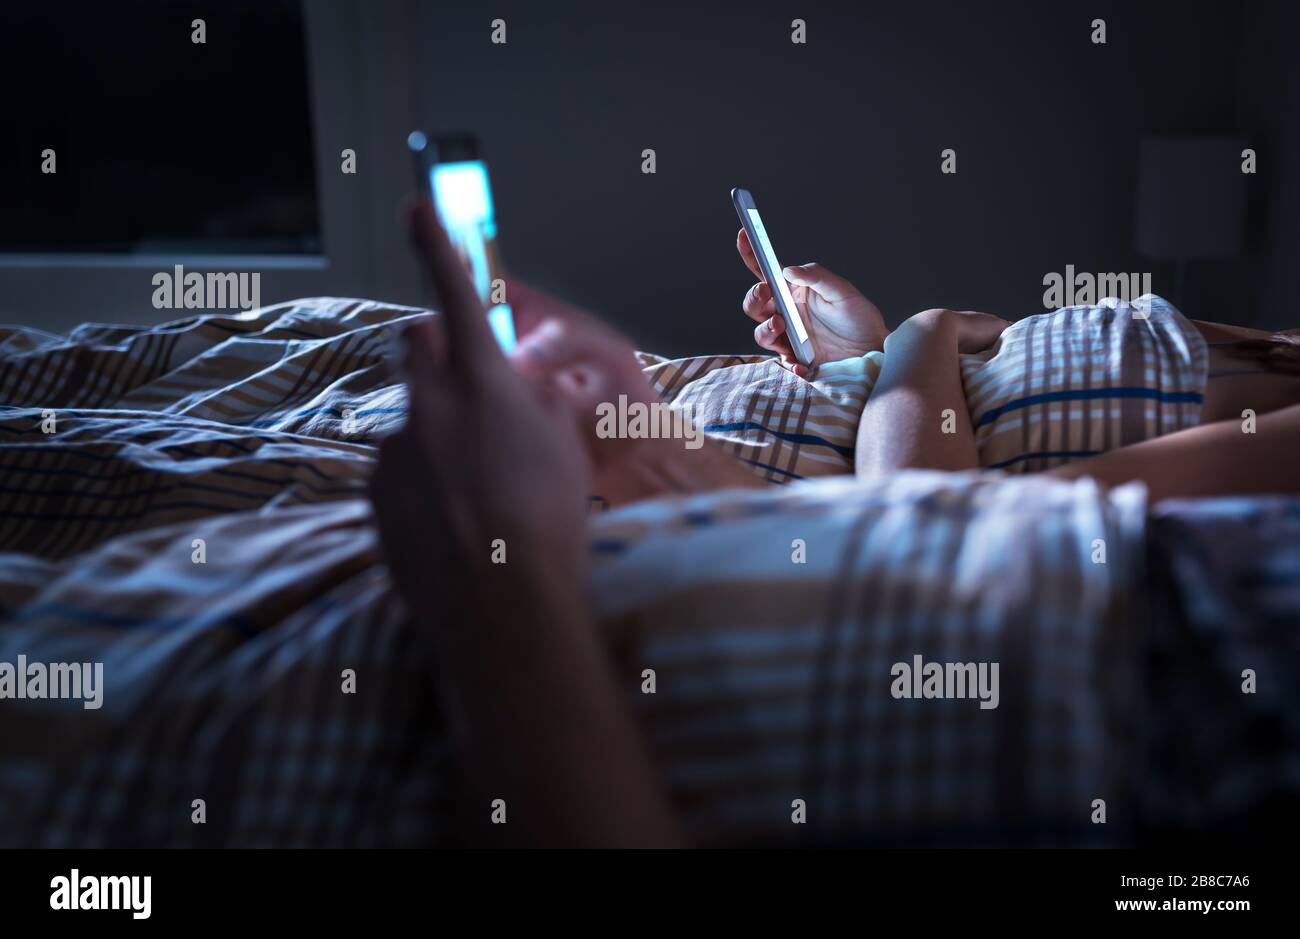 Bored distant couple ignoring each other lying in bed at night while using mobile phones. Smartphone addict. Obsessed and distracted man and woman. Stock Photo